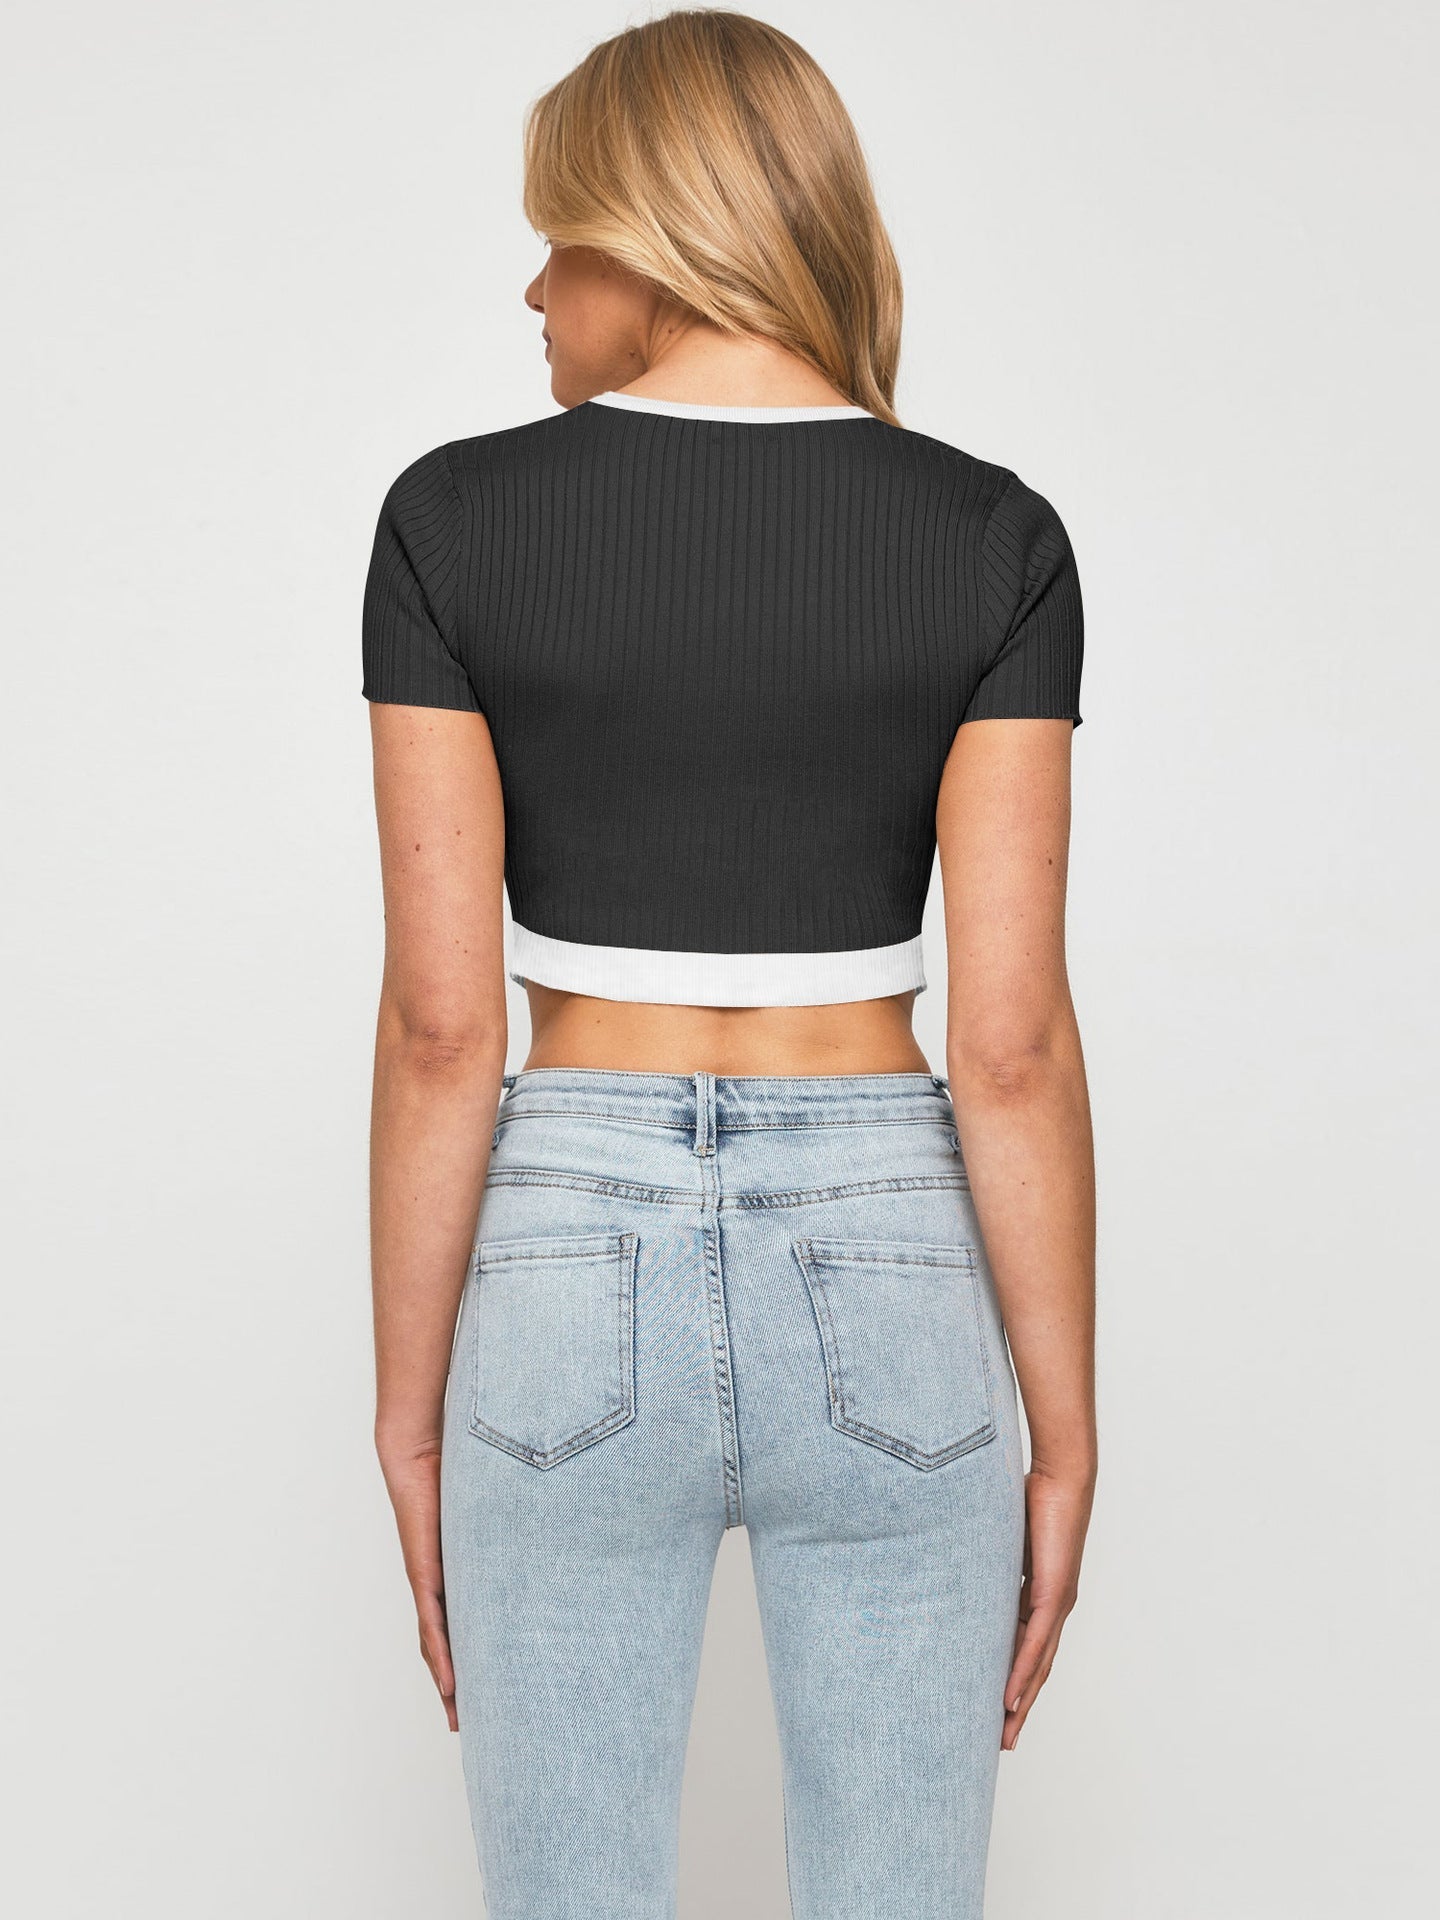 Trim Pointed Hem Ribbed Crop Top - Women’s Clothing & Accessories - Shirts & Tops - 2 - 2024